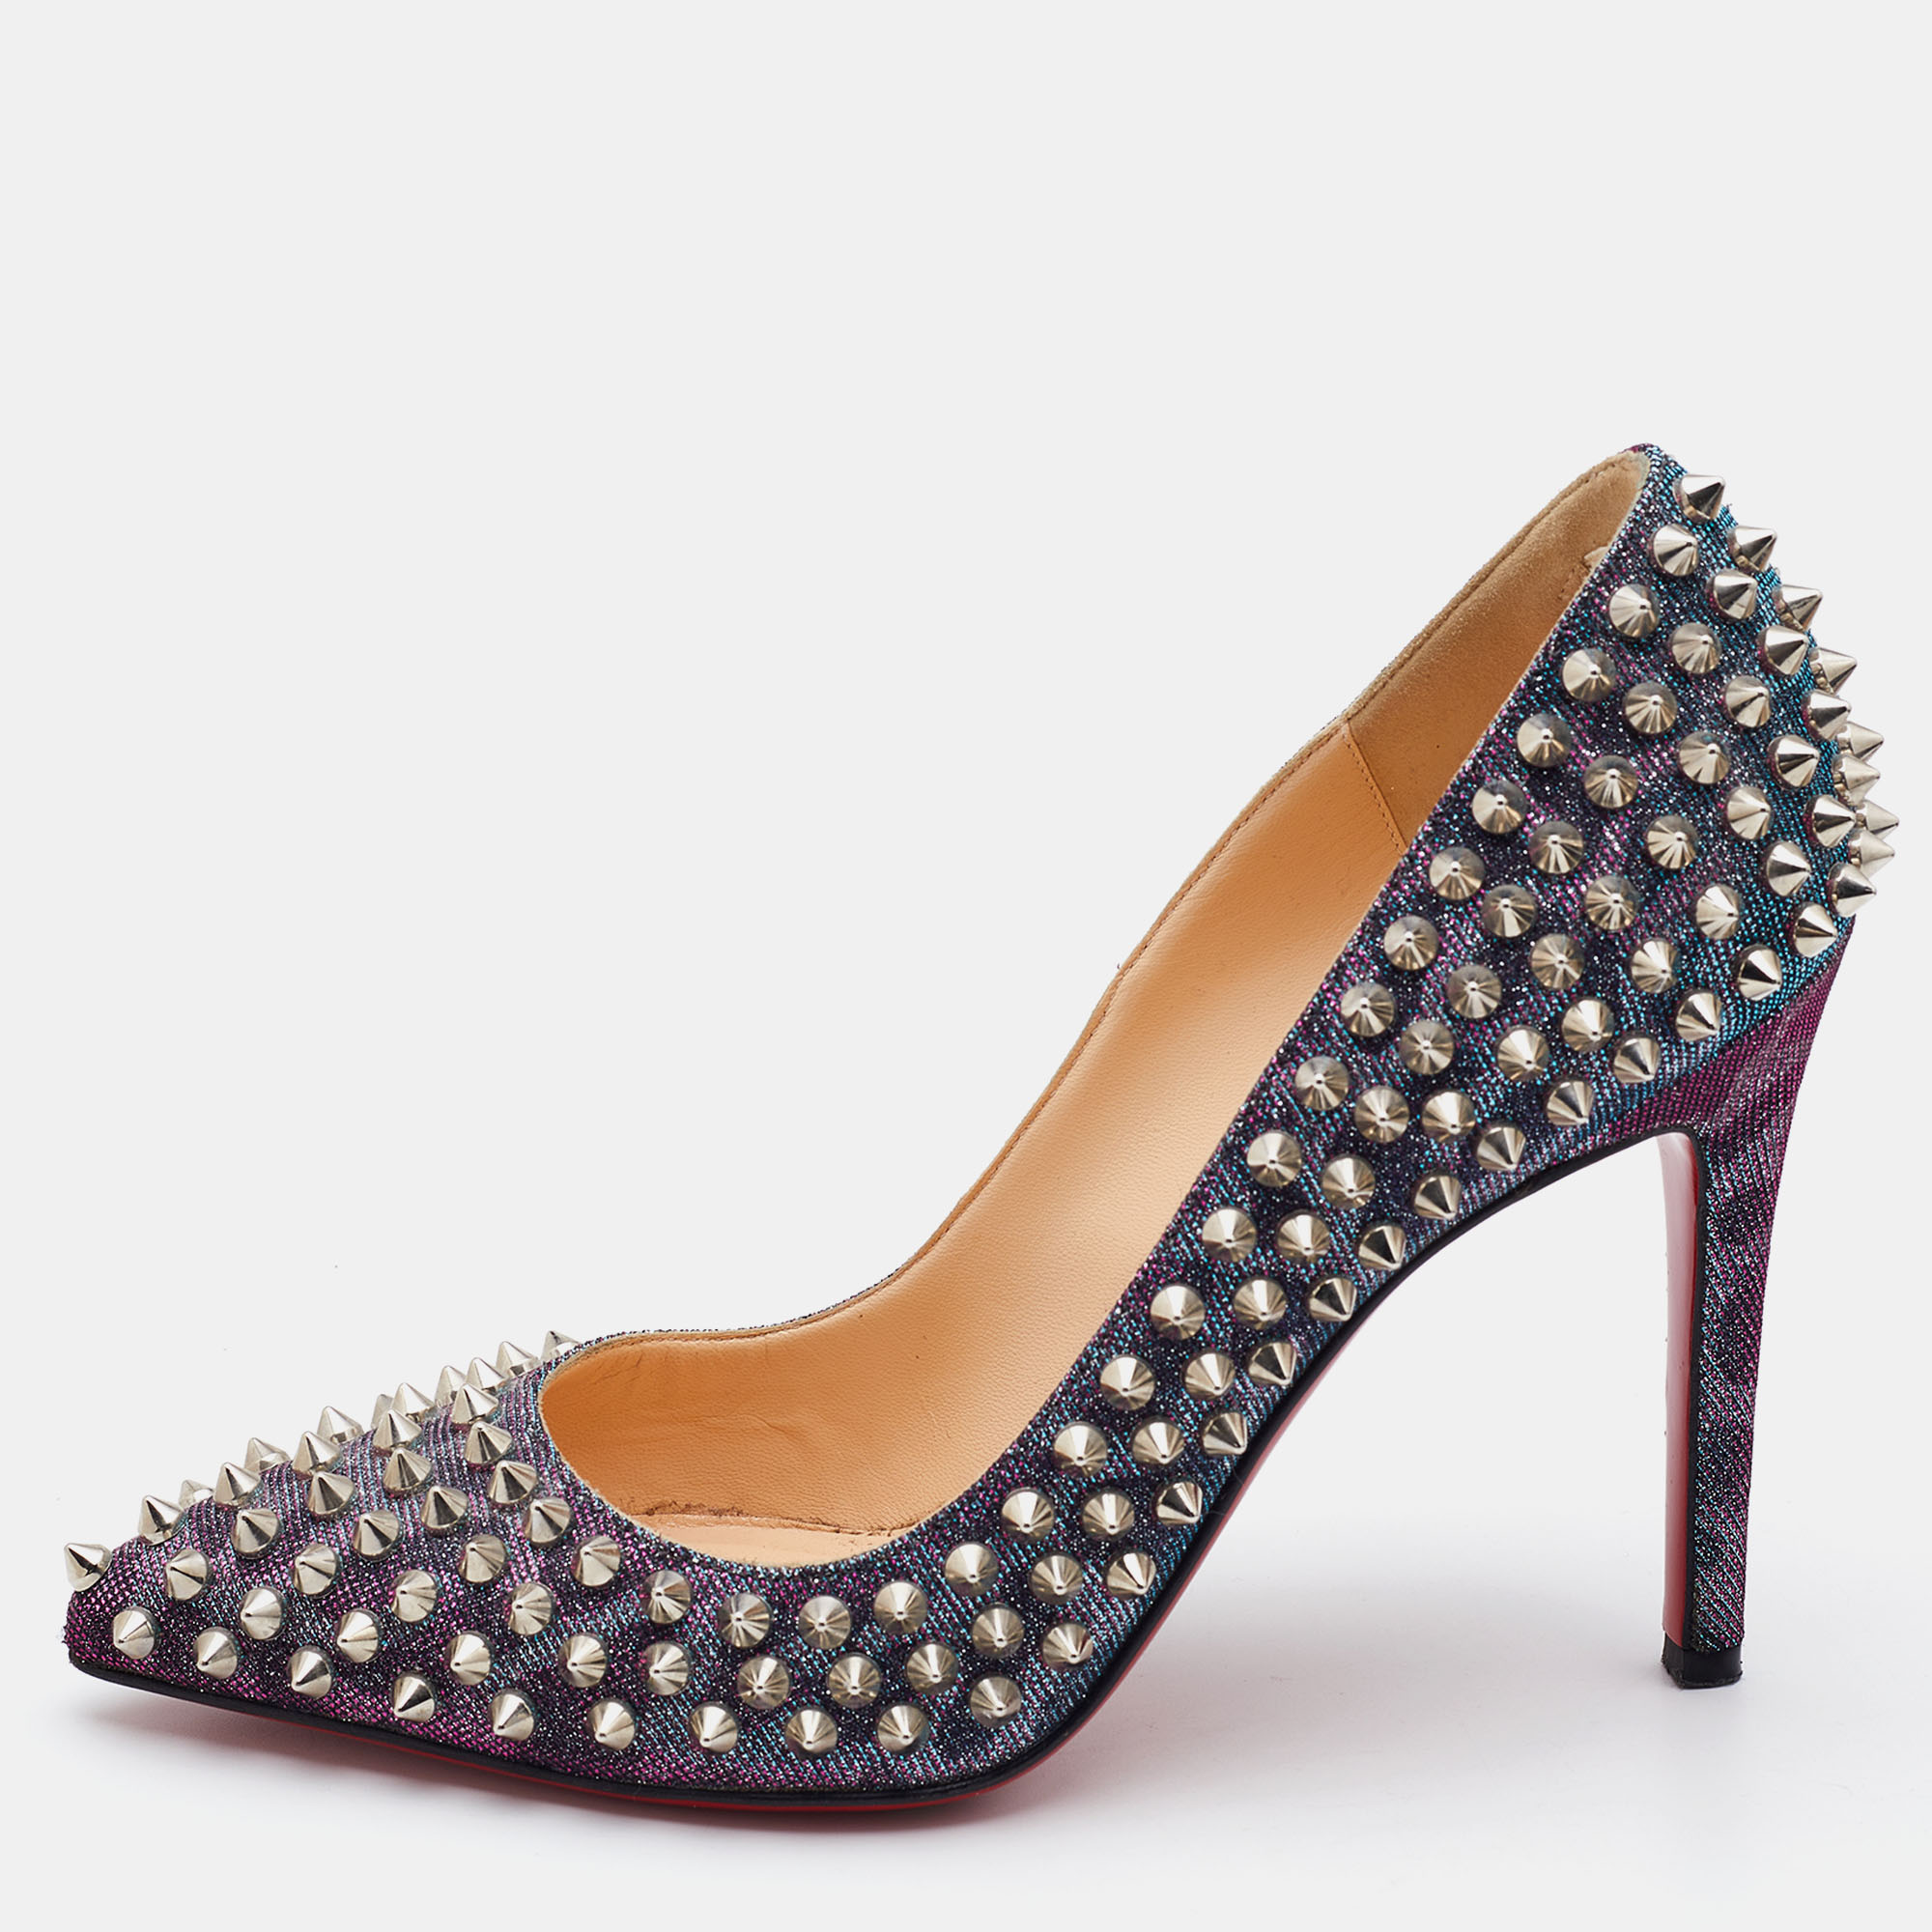 Pre-owned Christian Louboutin Multicolor Holographic Lurex Fabric Pigalle Spikes Pumps Size 37